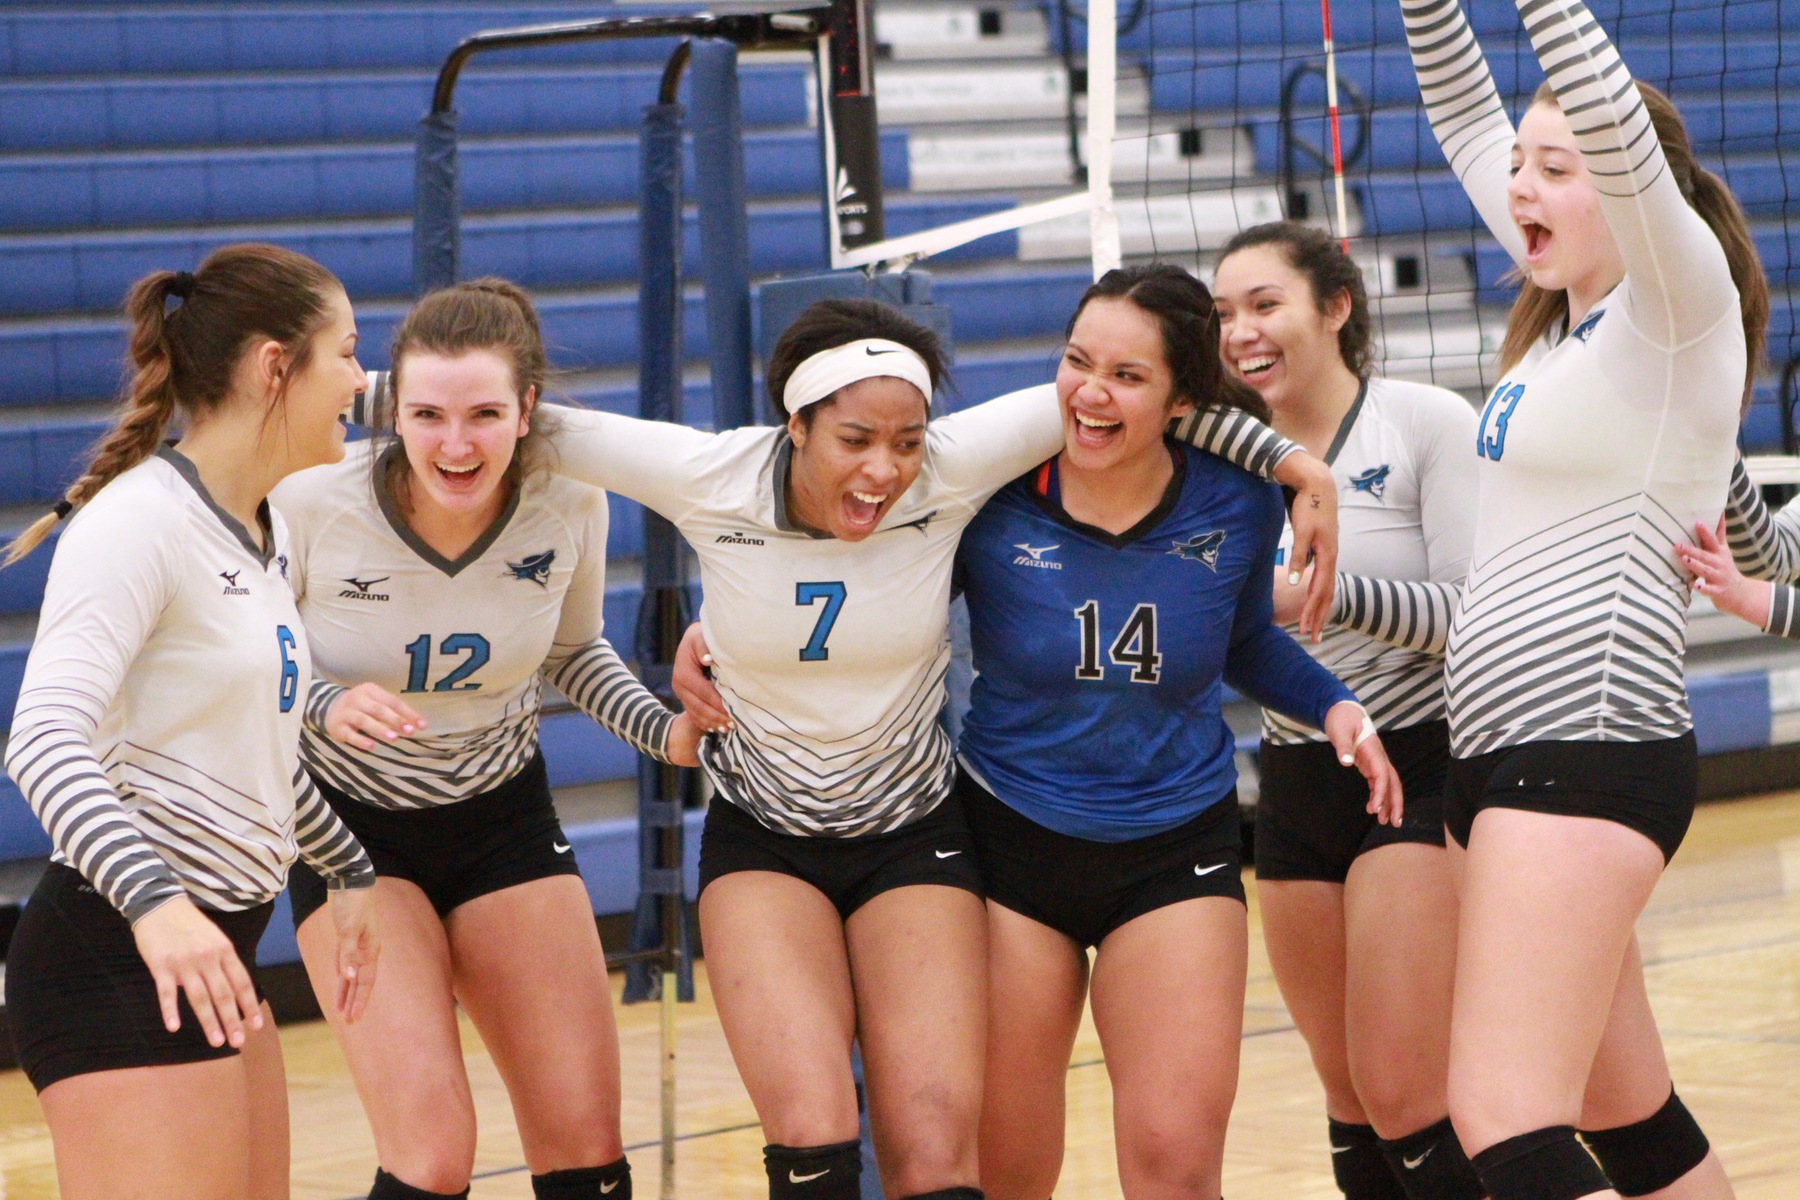 Reivers end on a high note taking 7th place in NJCAA tournament